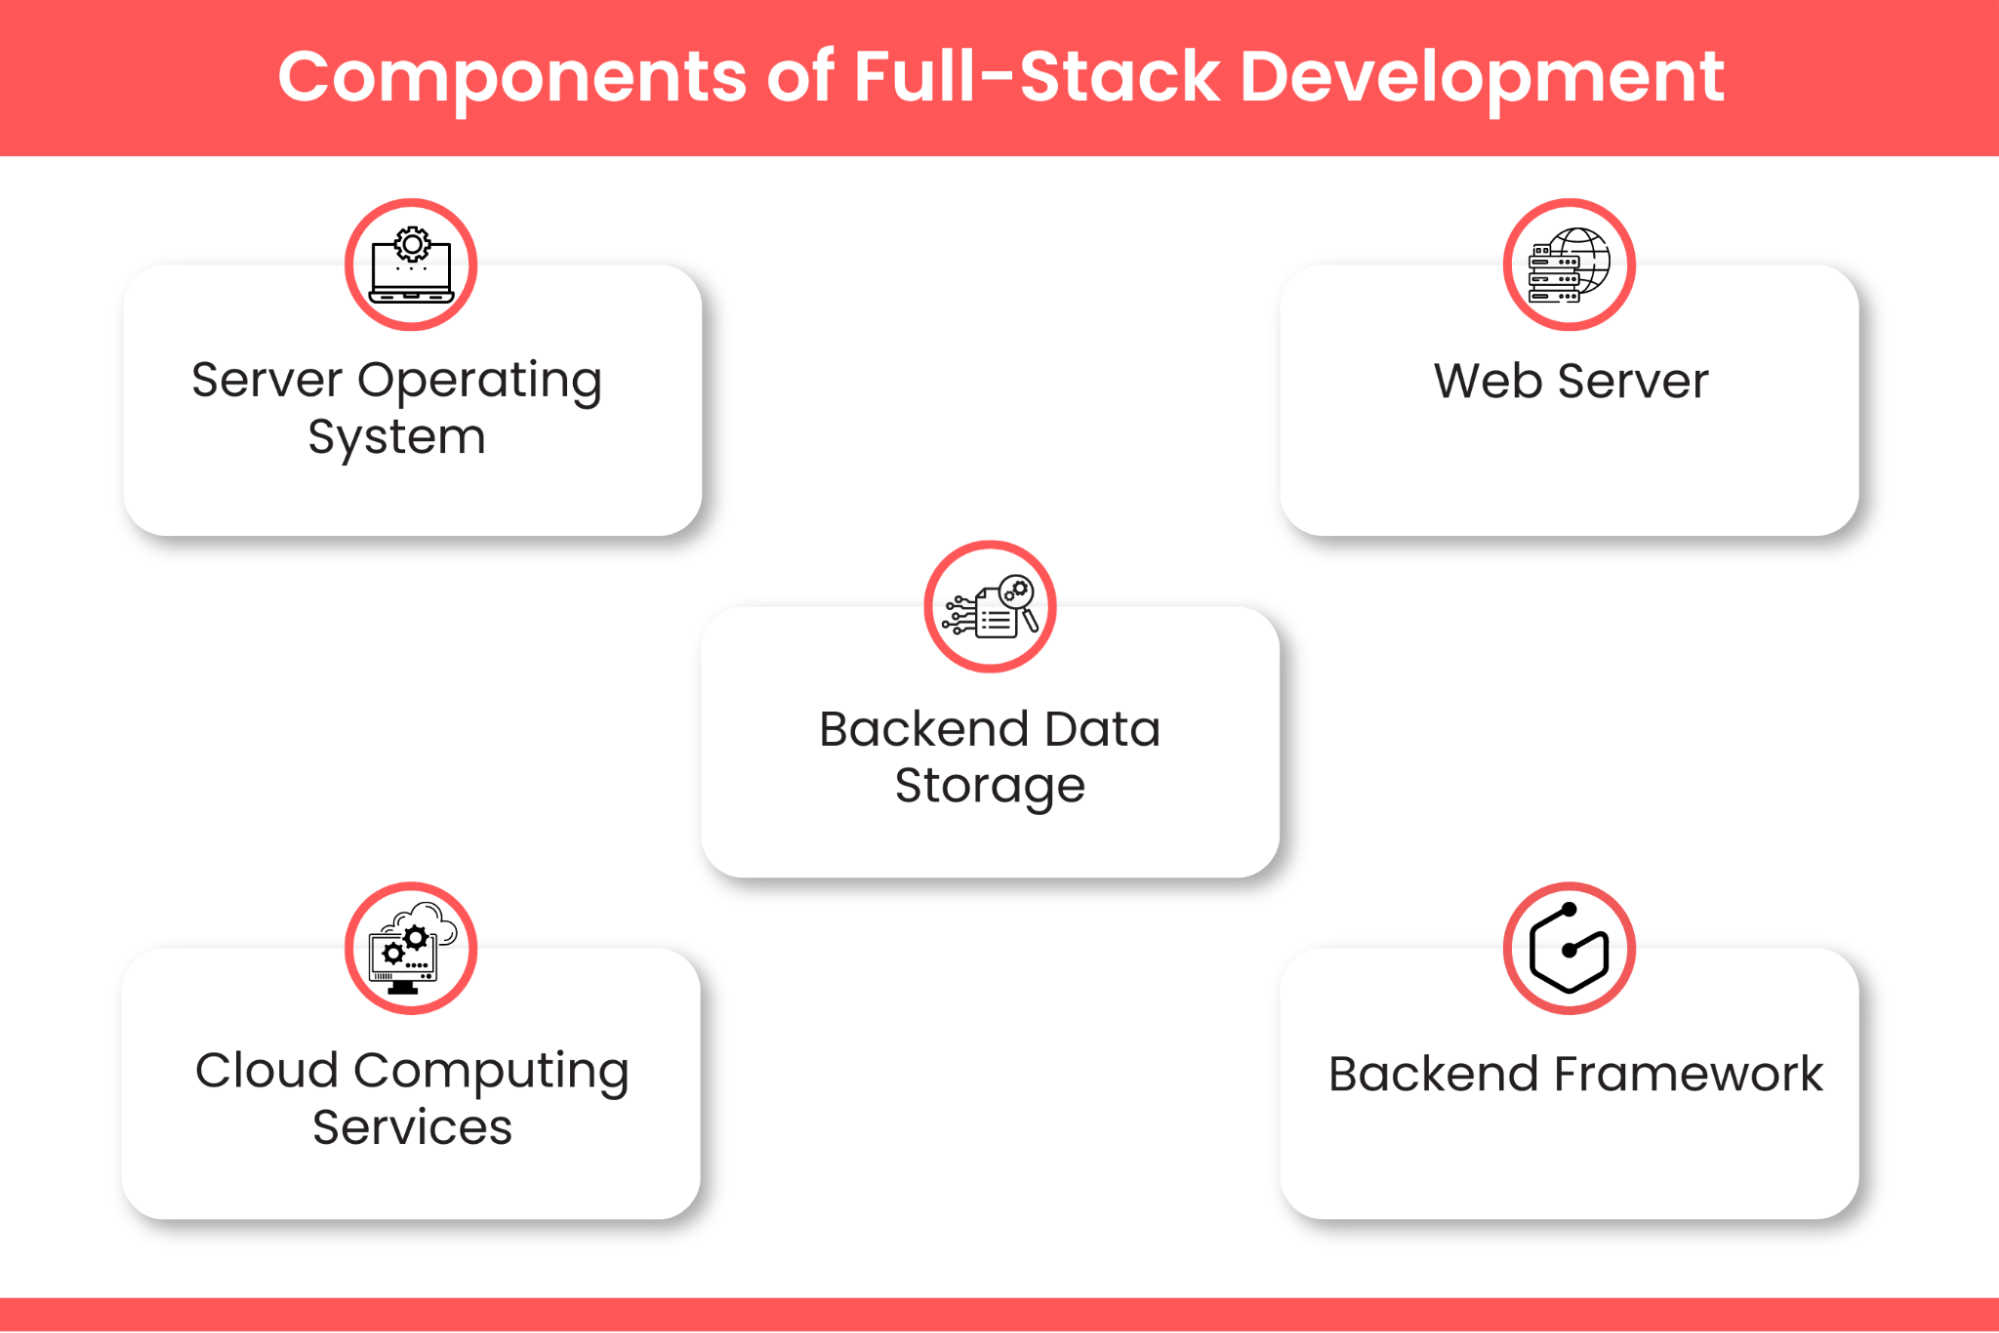 What are the Components of Full Stack Development